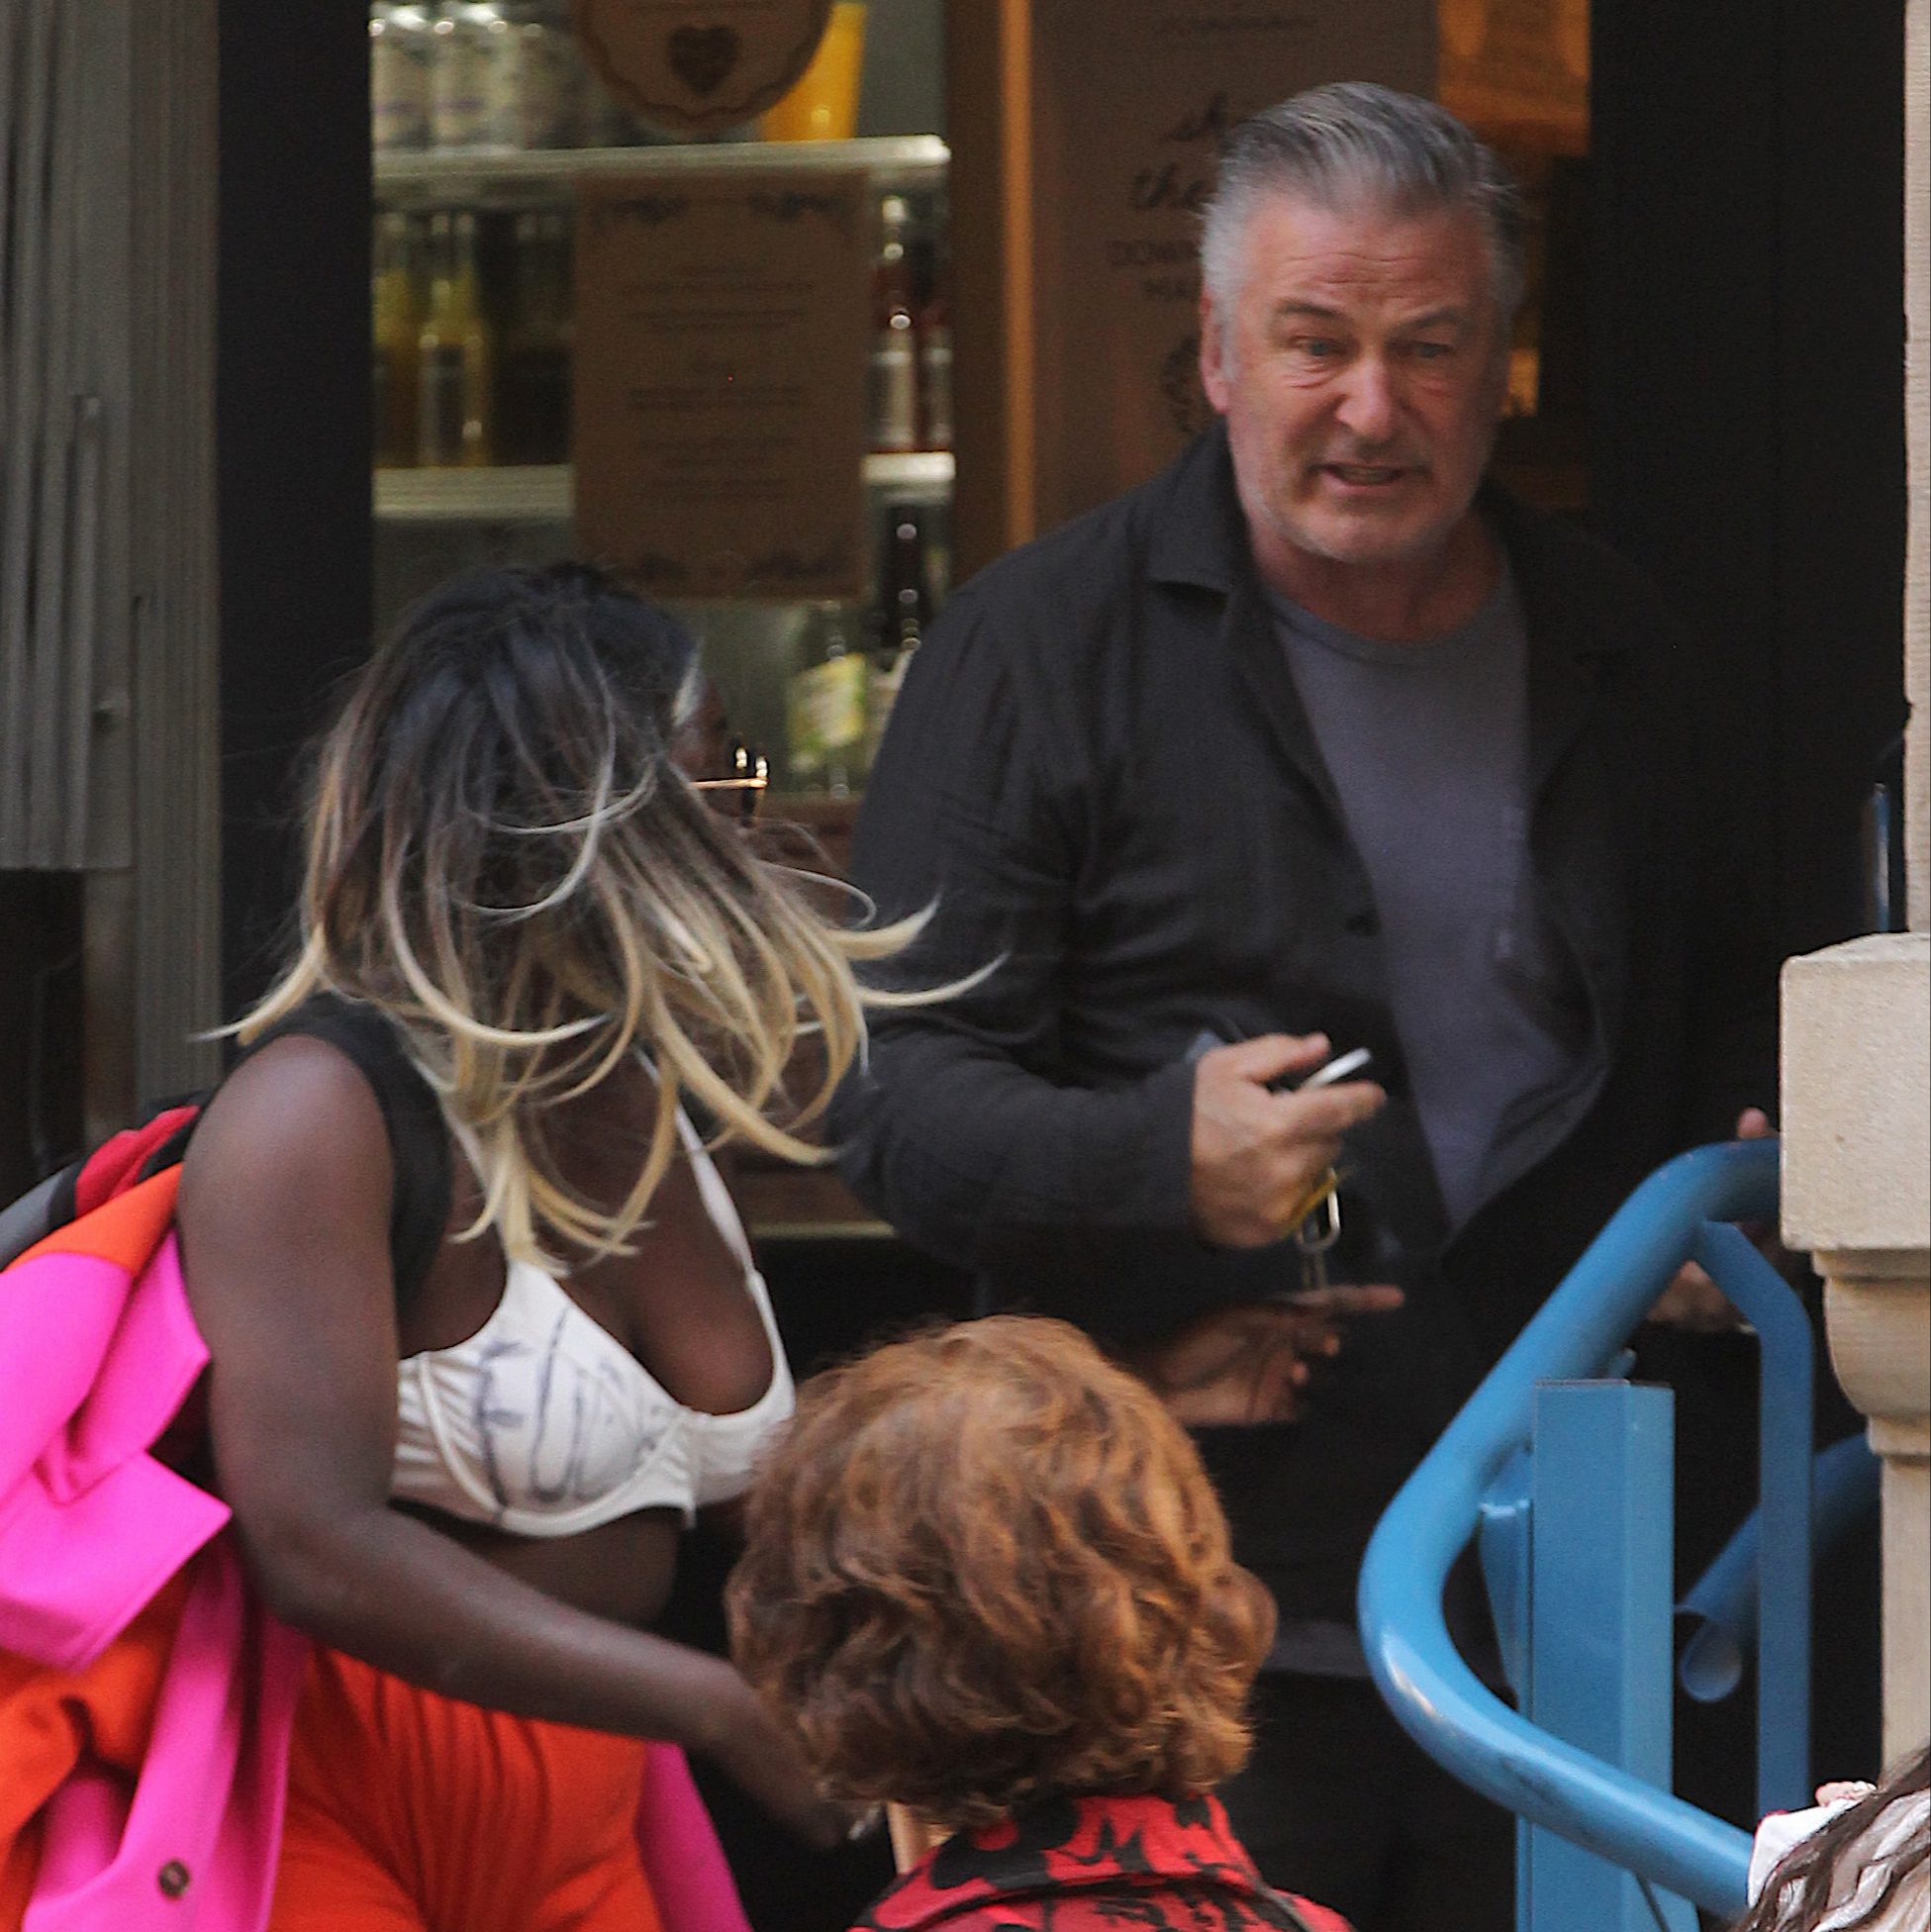 Baldwin appeared to have snatched Crackhead Barney's phone out of her hands before leaving